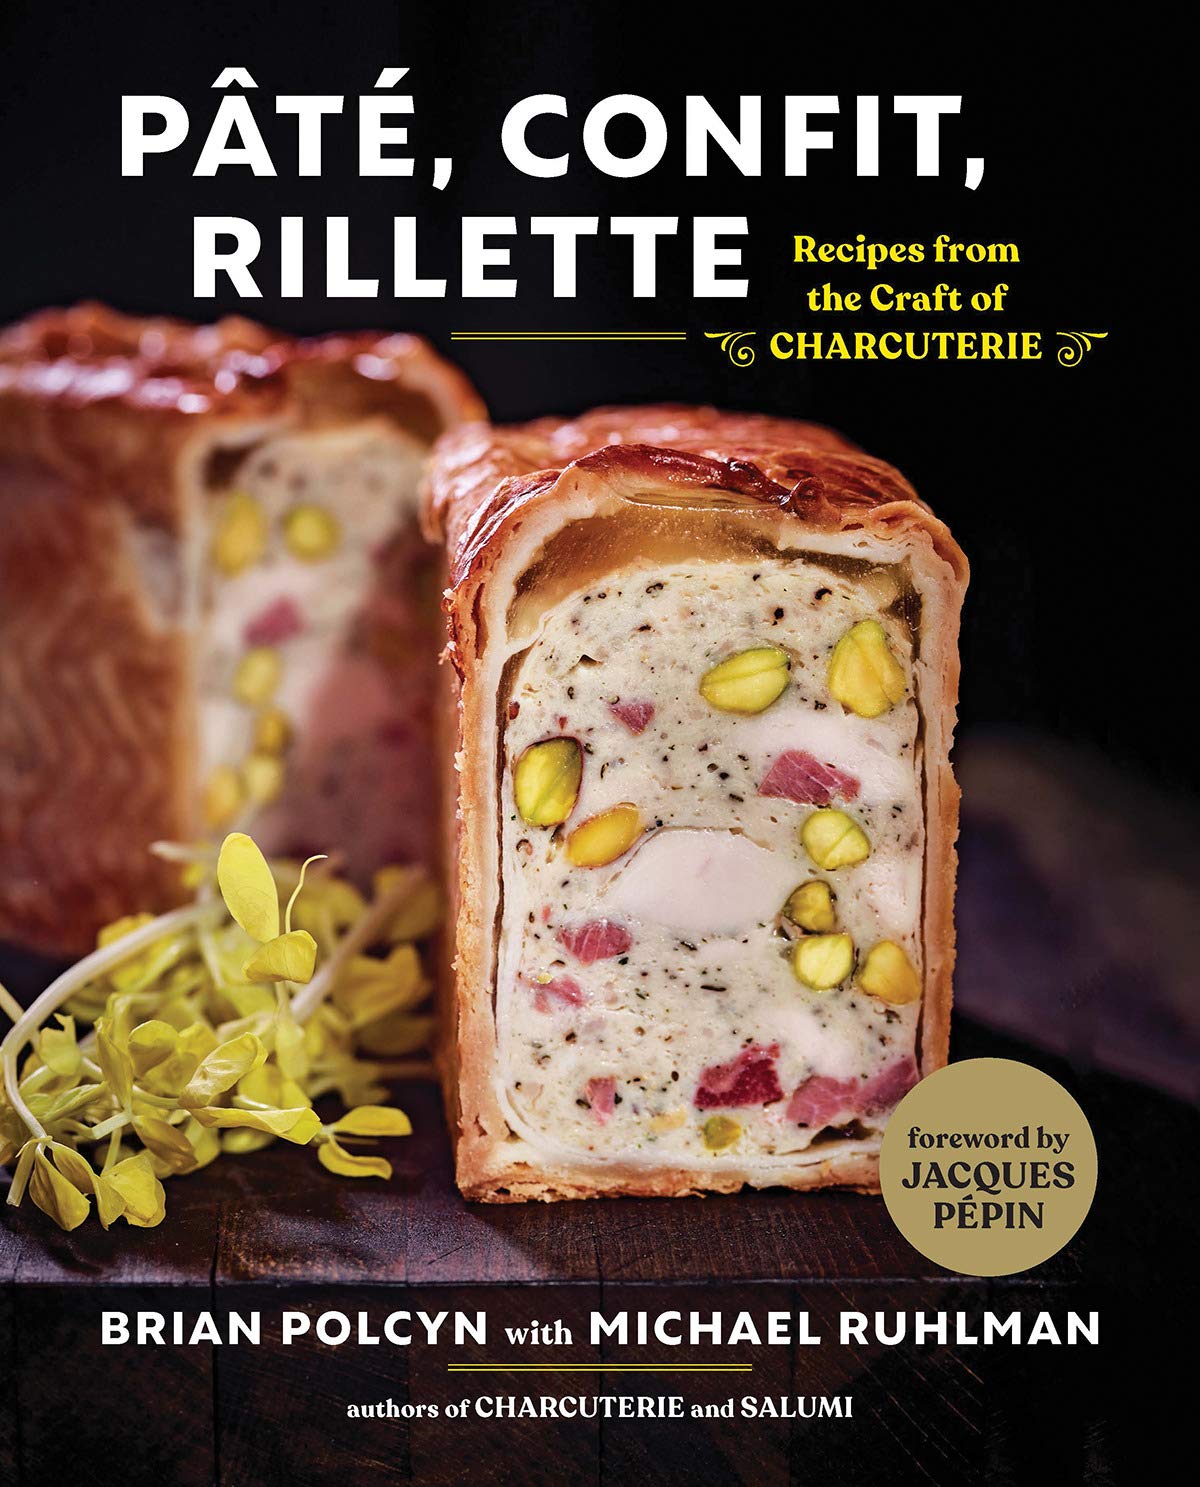 Pâté, Confit, Rillette: Recipes from the Craft of Charcuterie (Brian Polcyn, Michael Ruhlman)